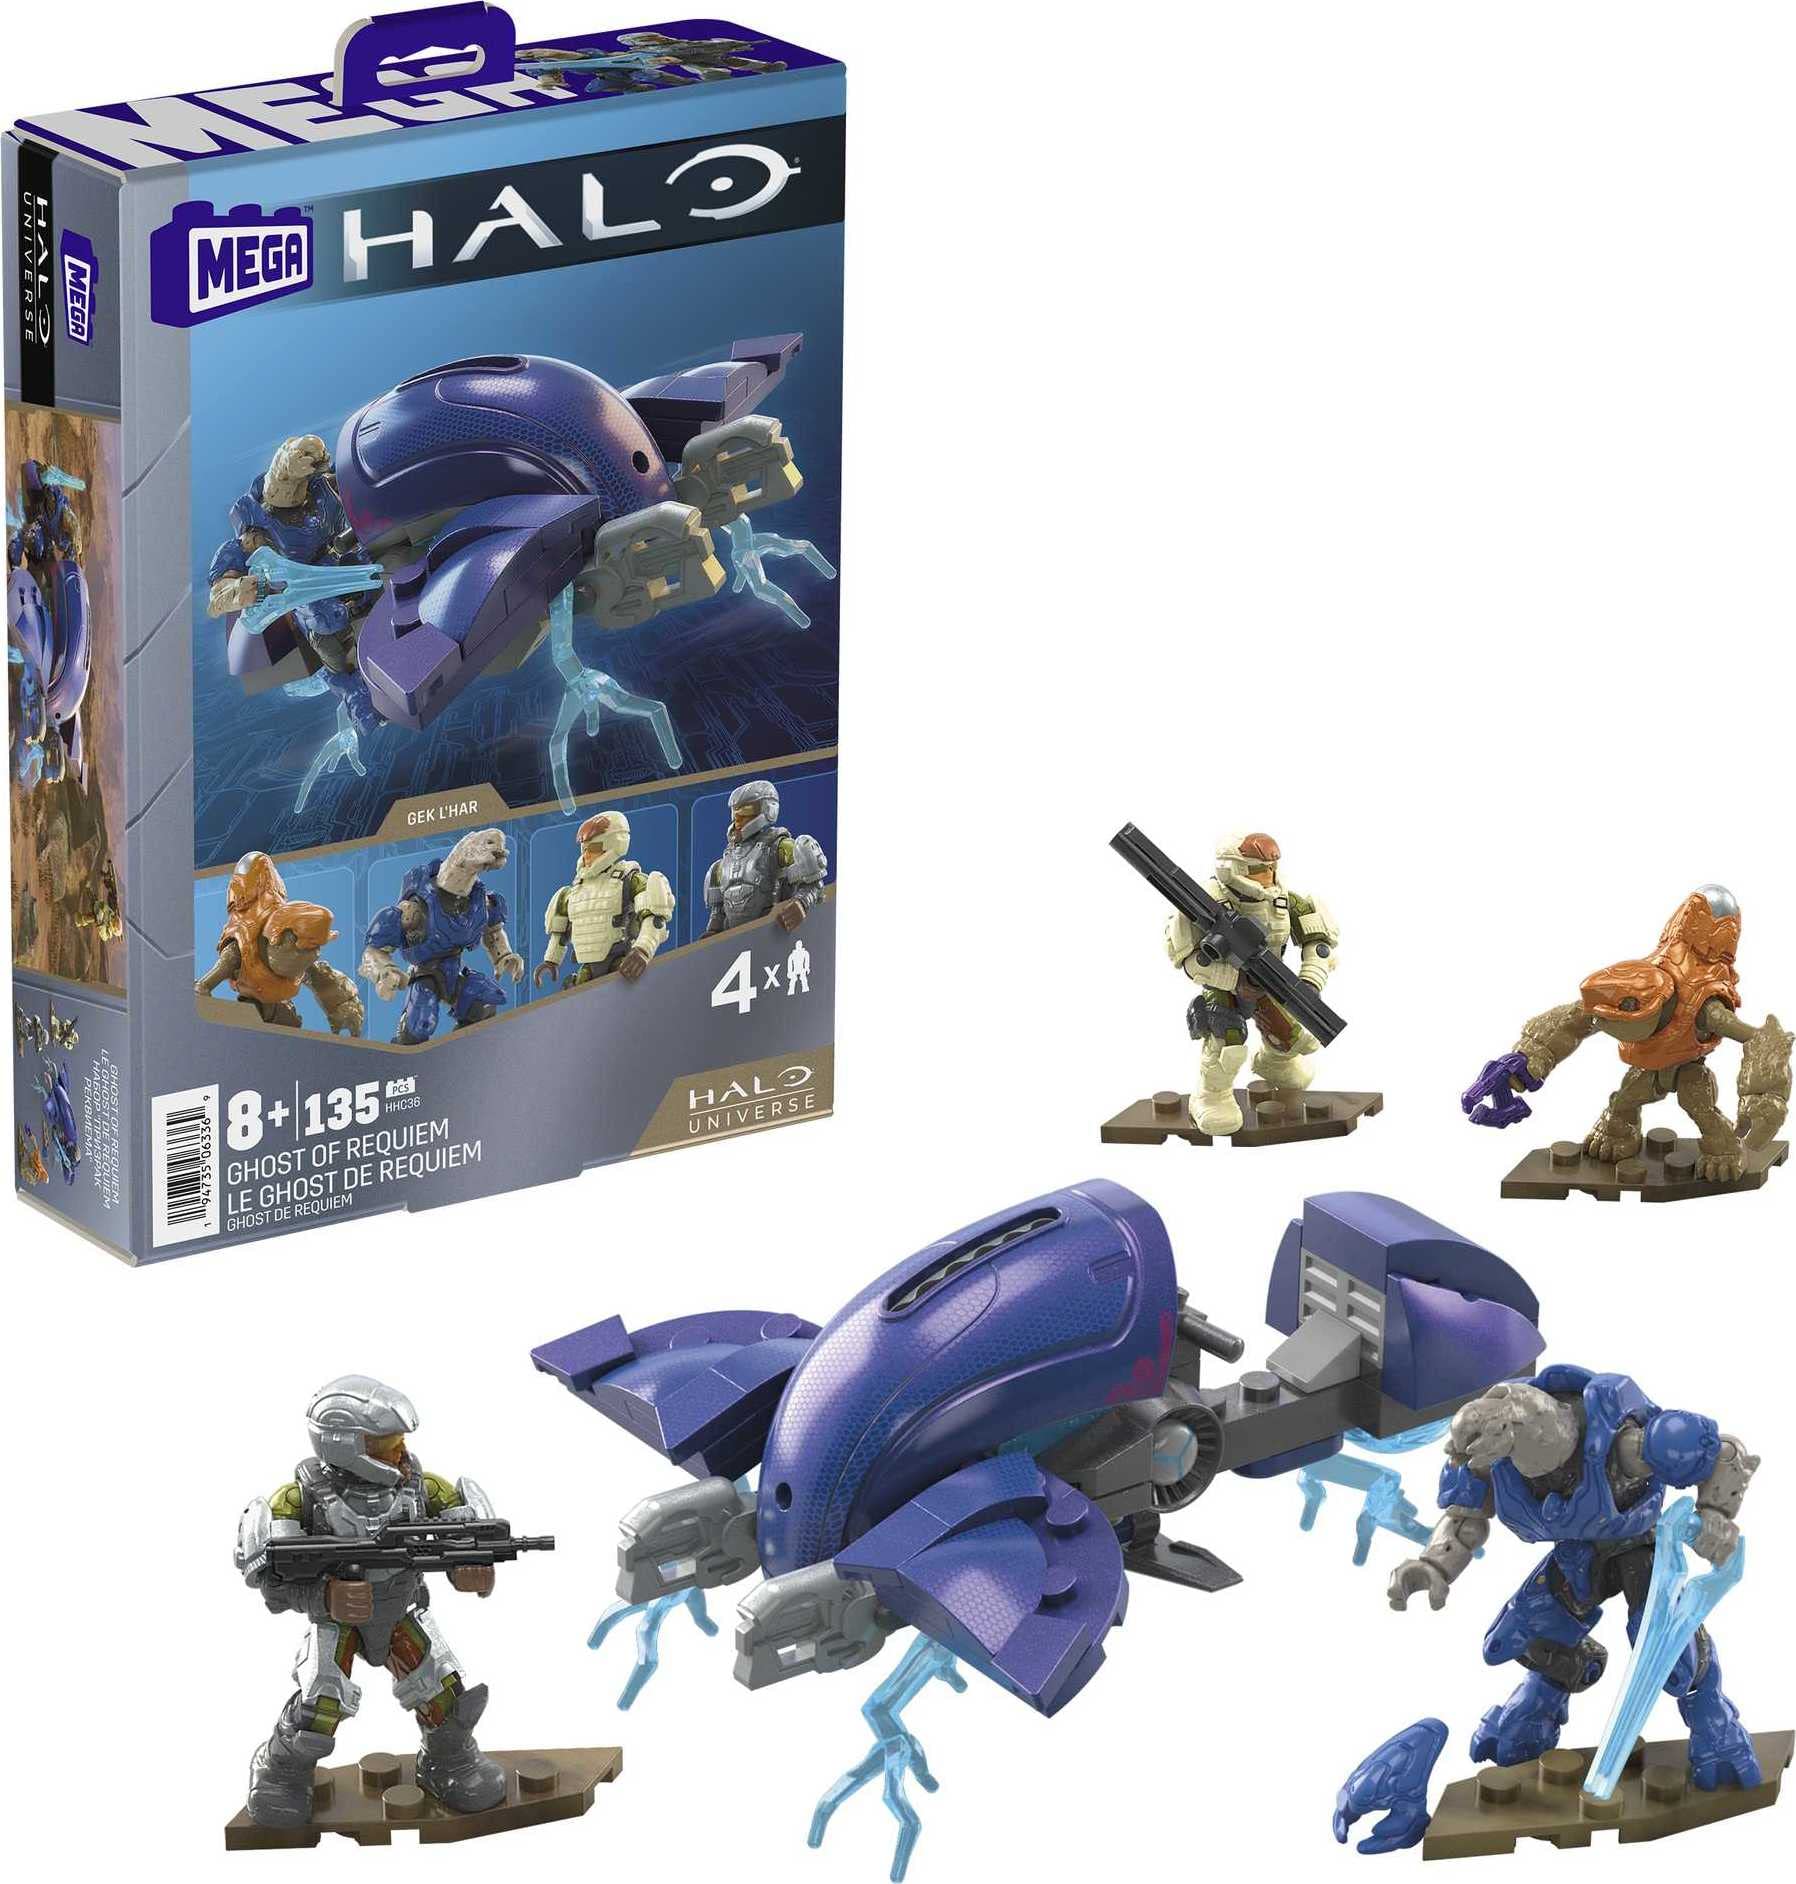 MEGA HALO Toys Vehicle Building Set, Ghost of Requiem Aircraft with 135 Pieces - $7.43 - Amazon